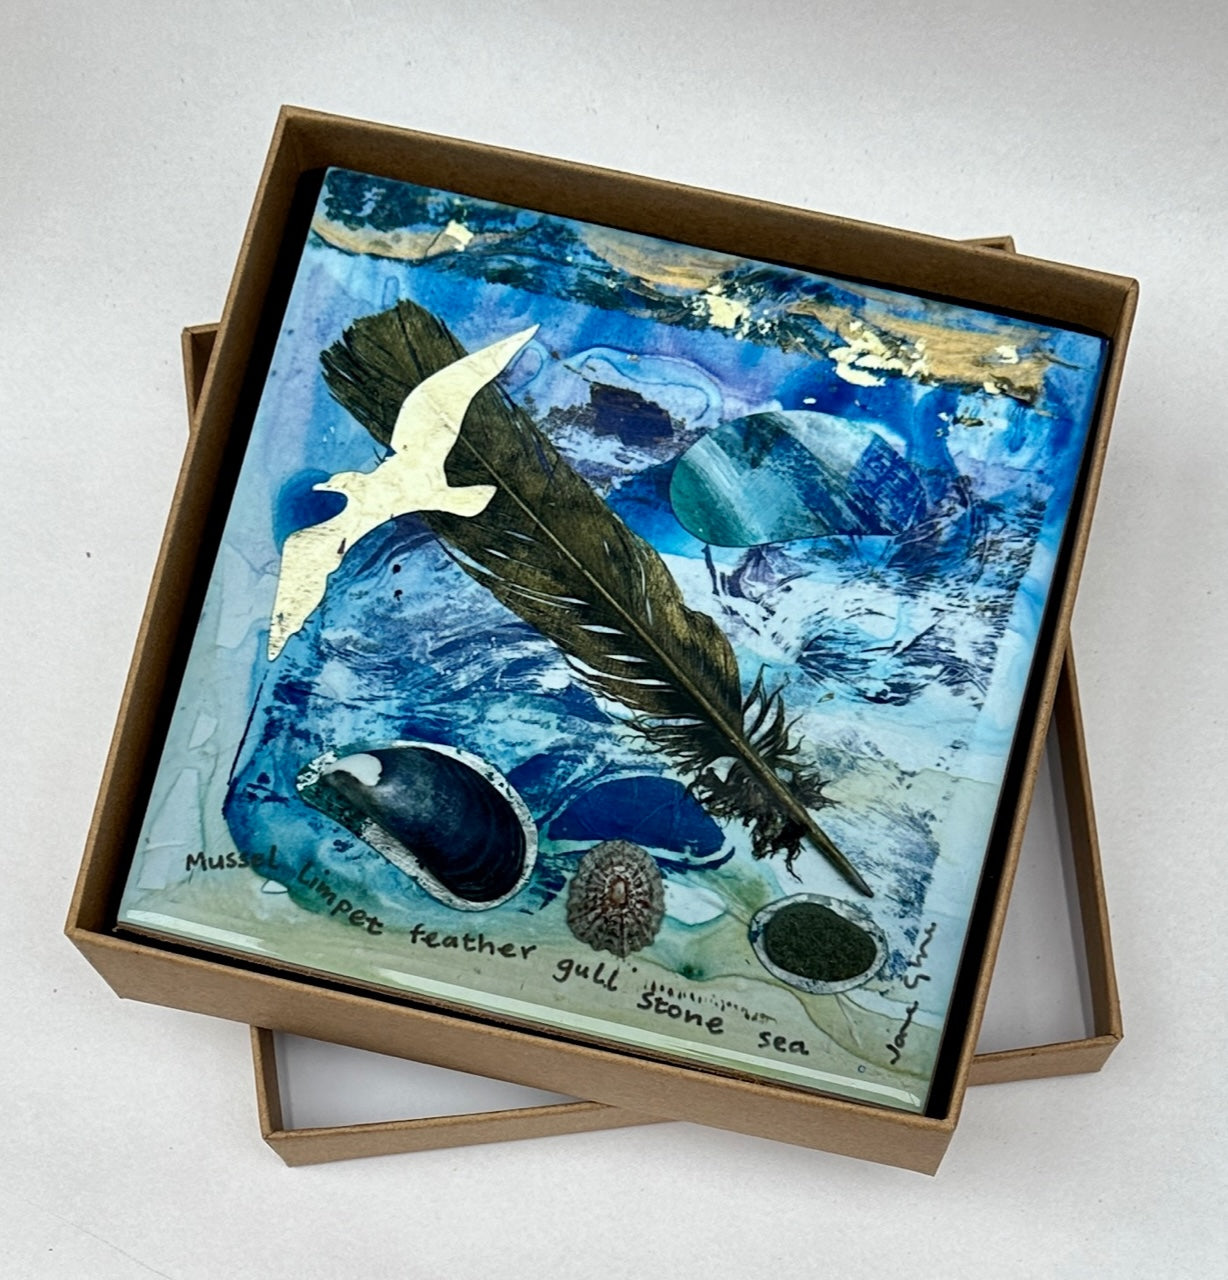 Small ceramic tile/Mussel limpet feather gull stone sea